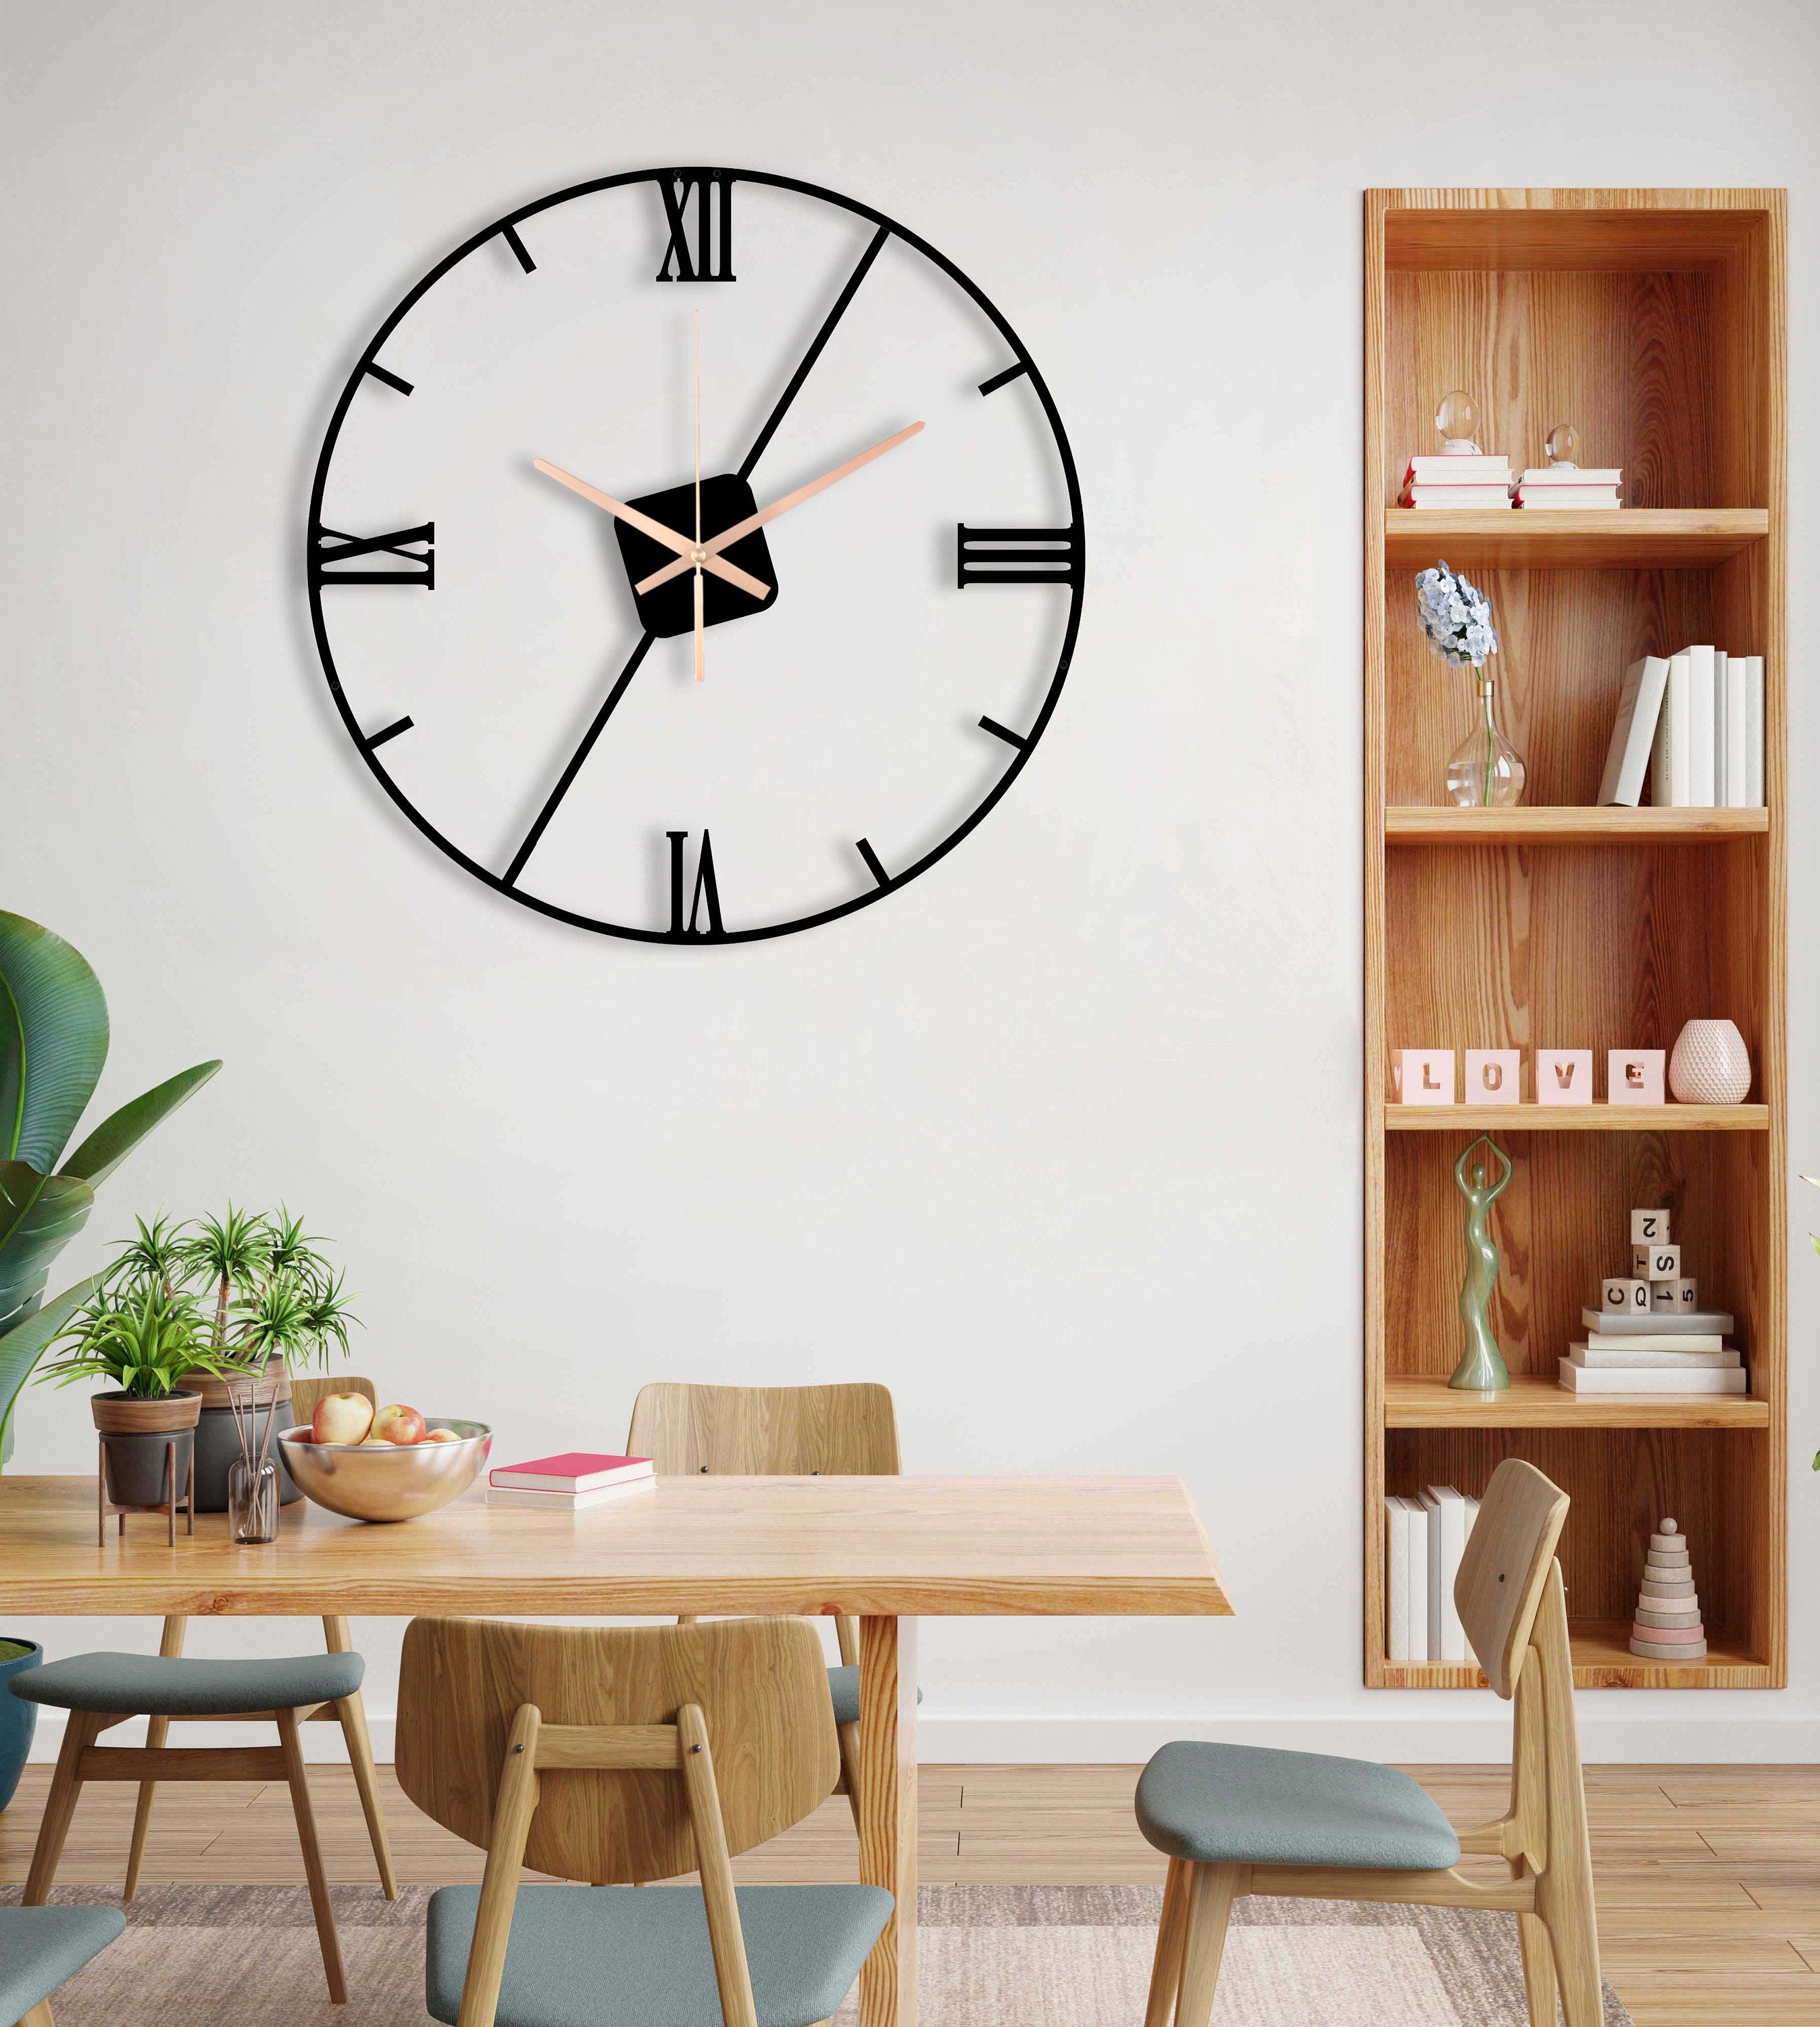 Minimalist Clock, Round Smal Wall Clock, Decorative Clock, Oversized Wall Clock, Metal Wall Clock, Home Decor And Gifts, Clocks For Wall